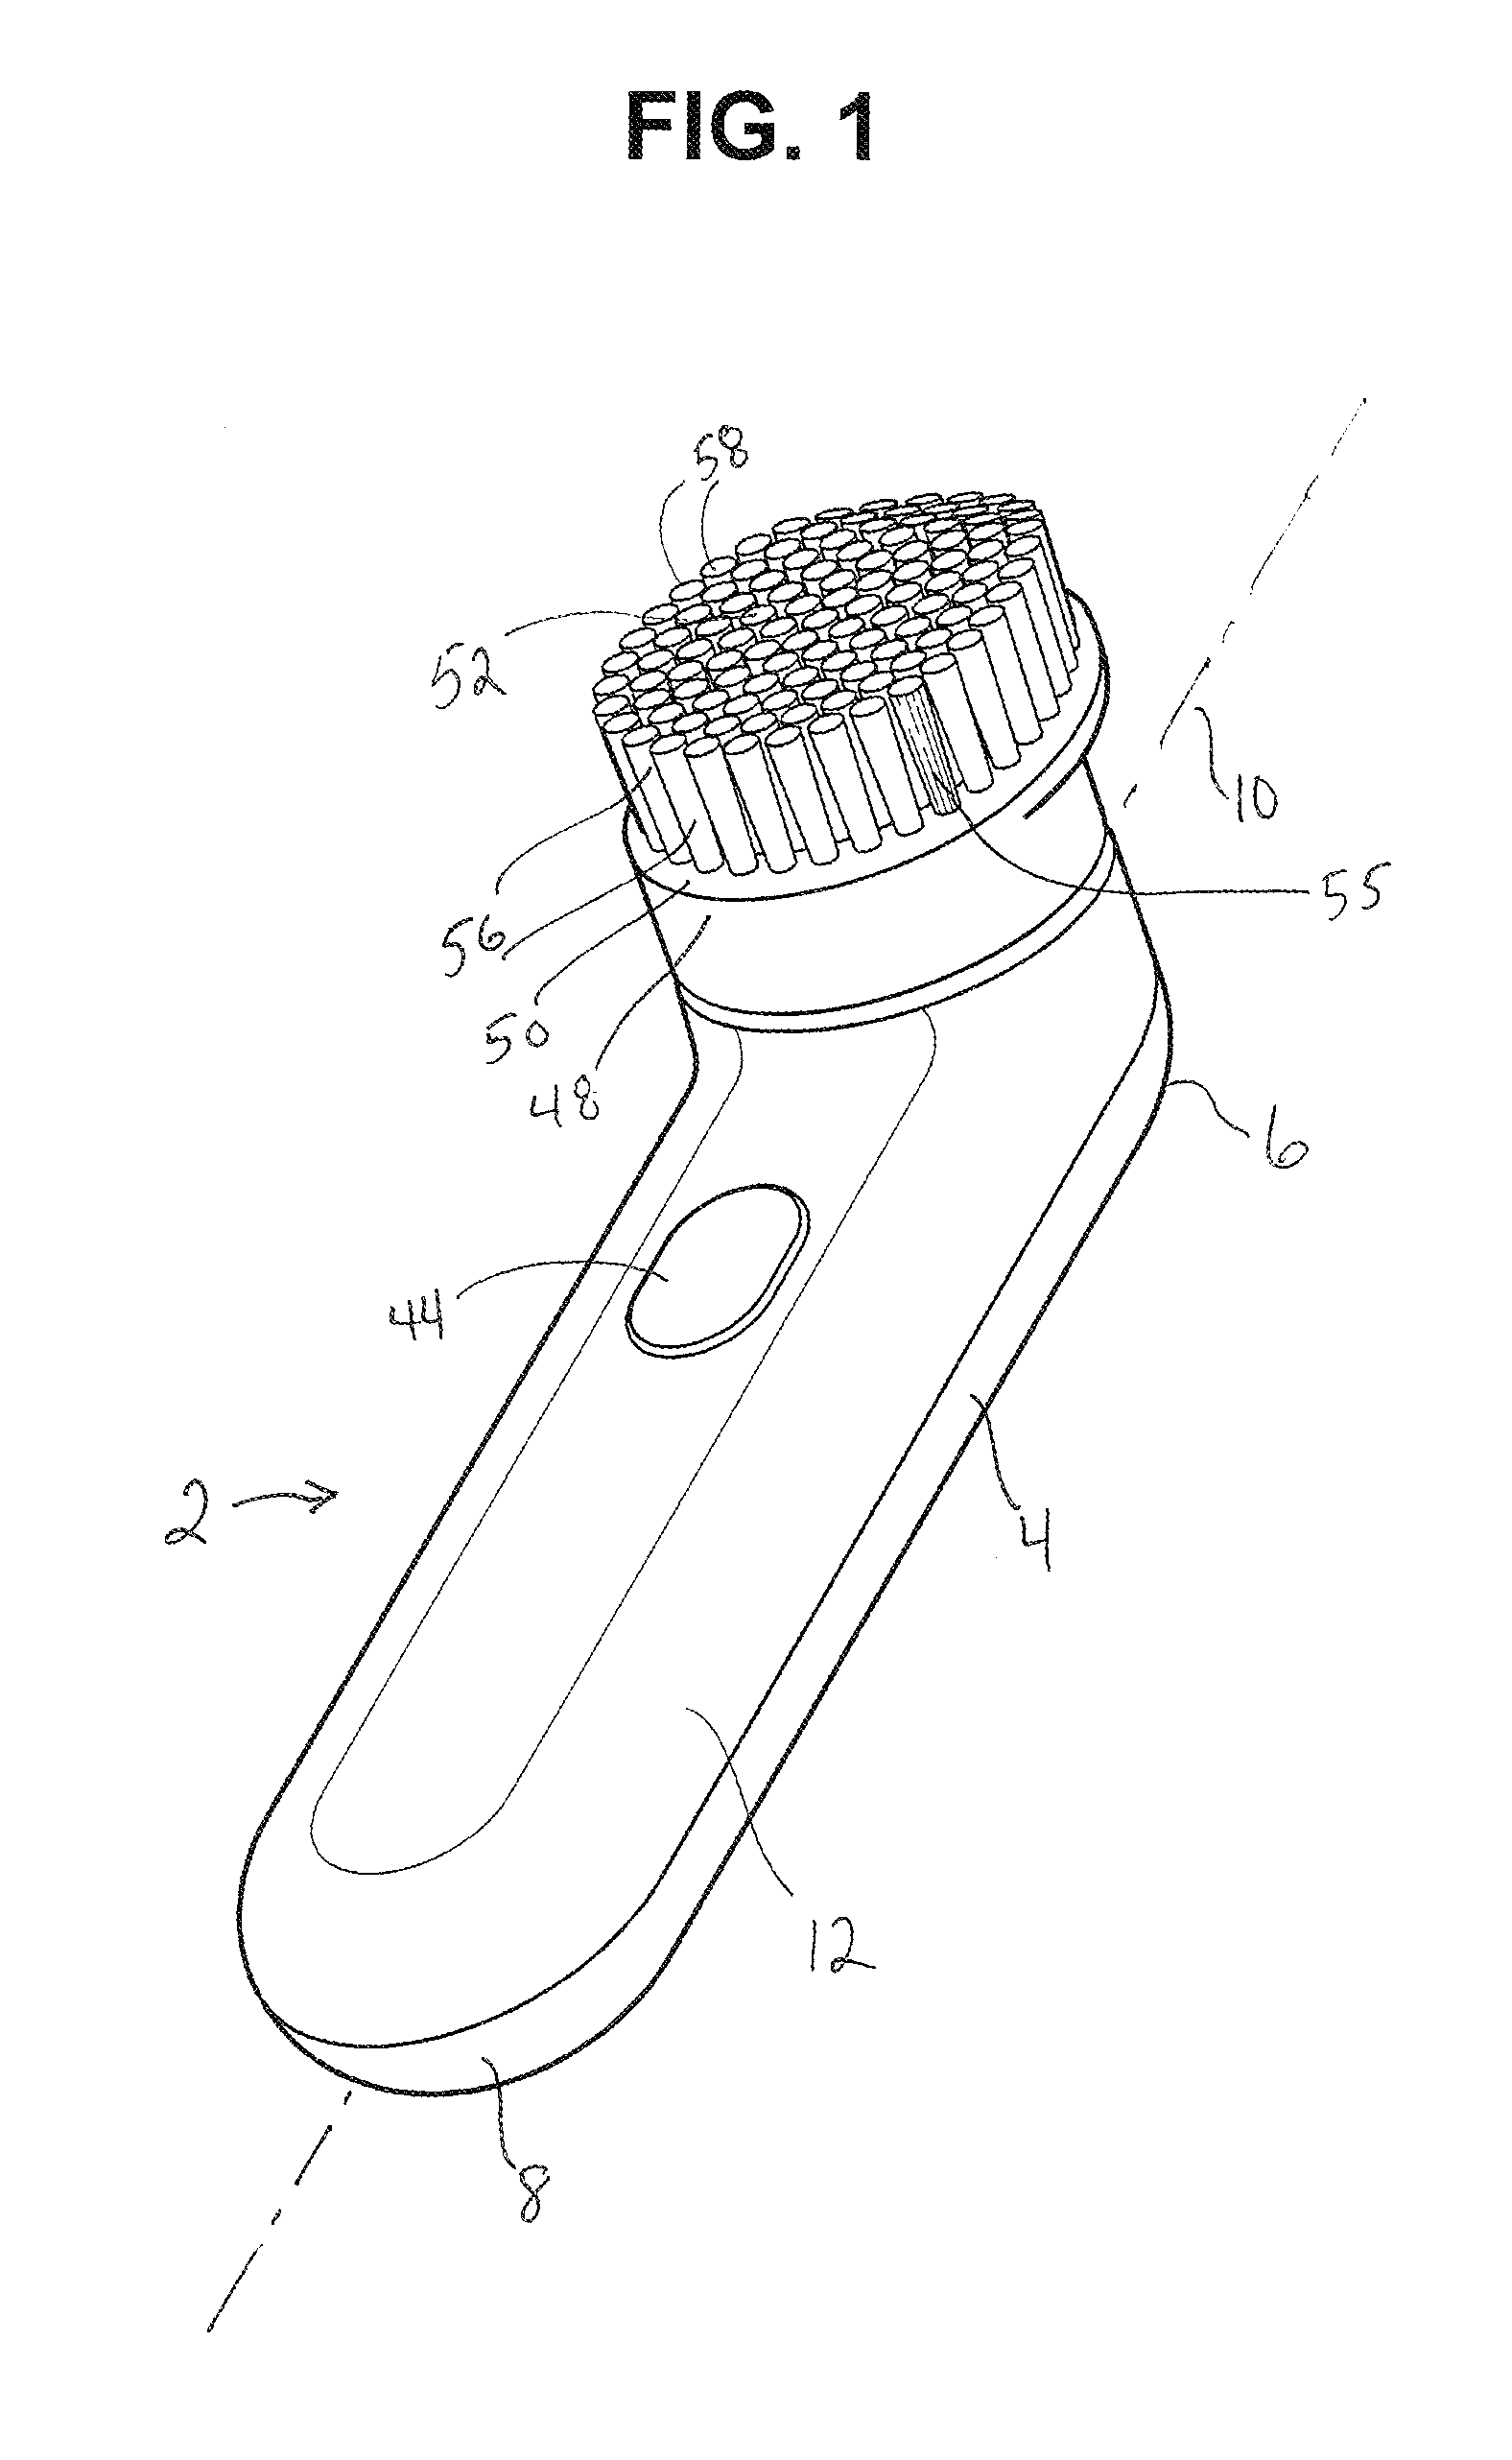 Powered skin care device